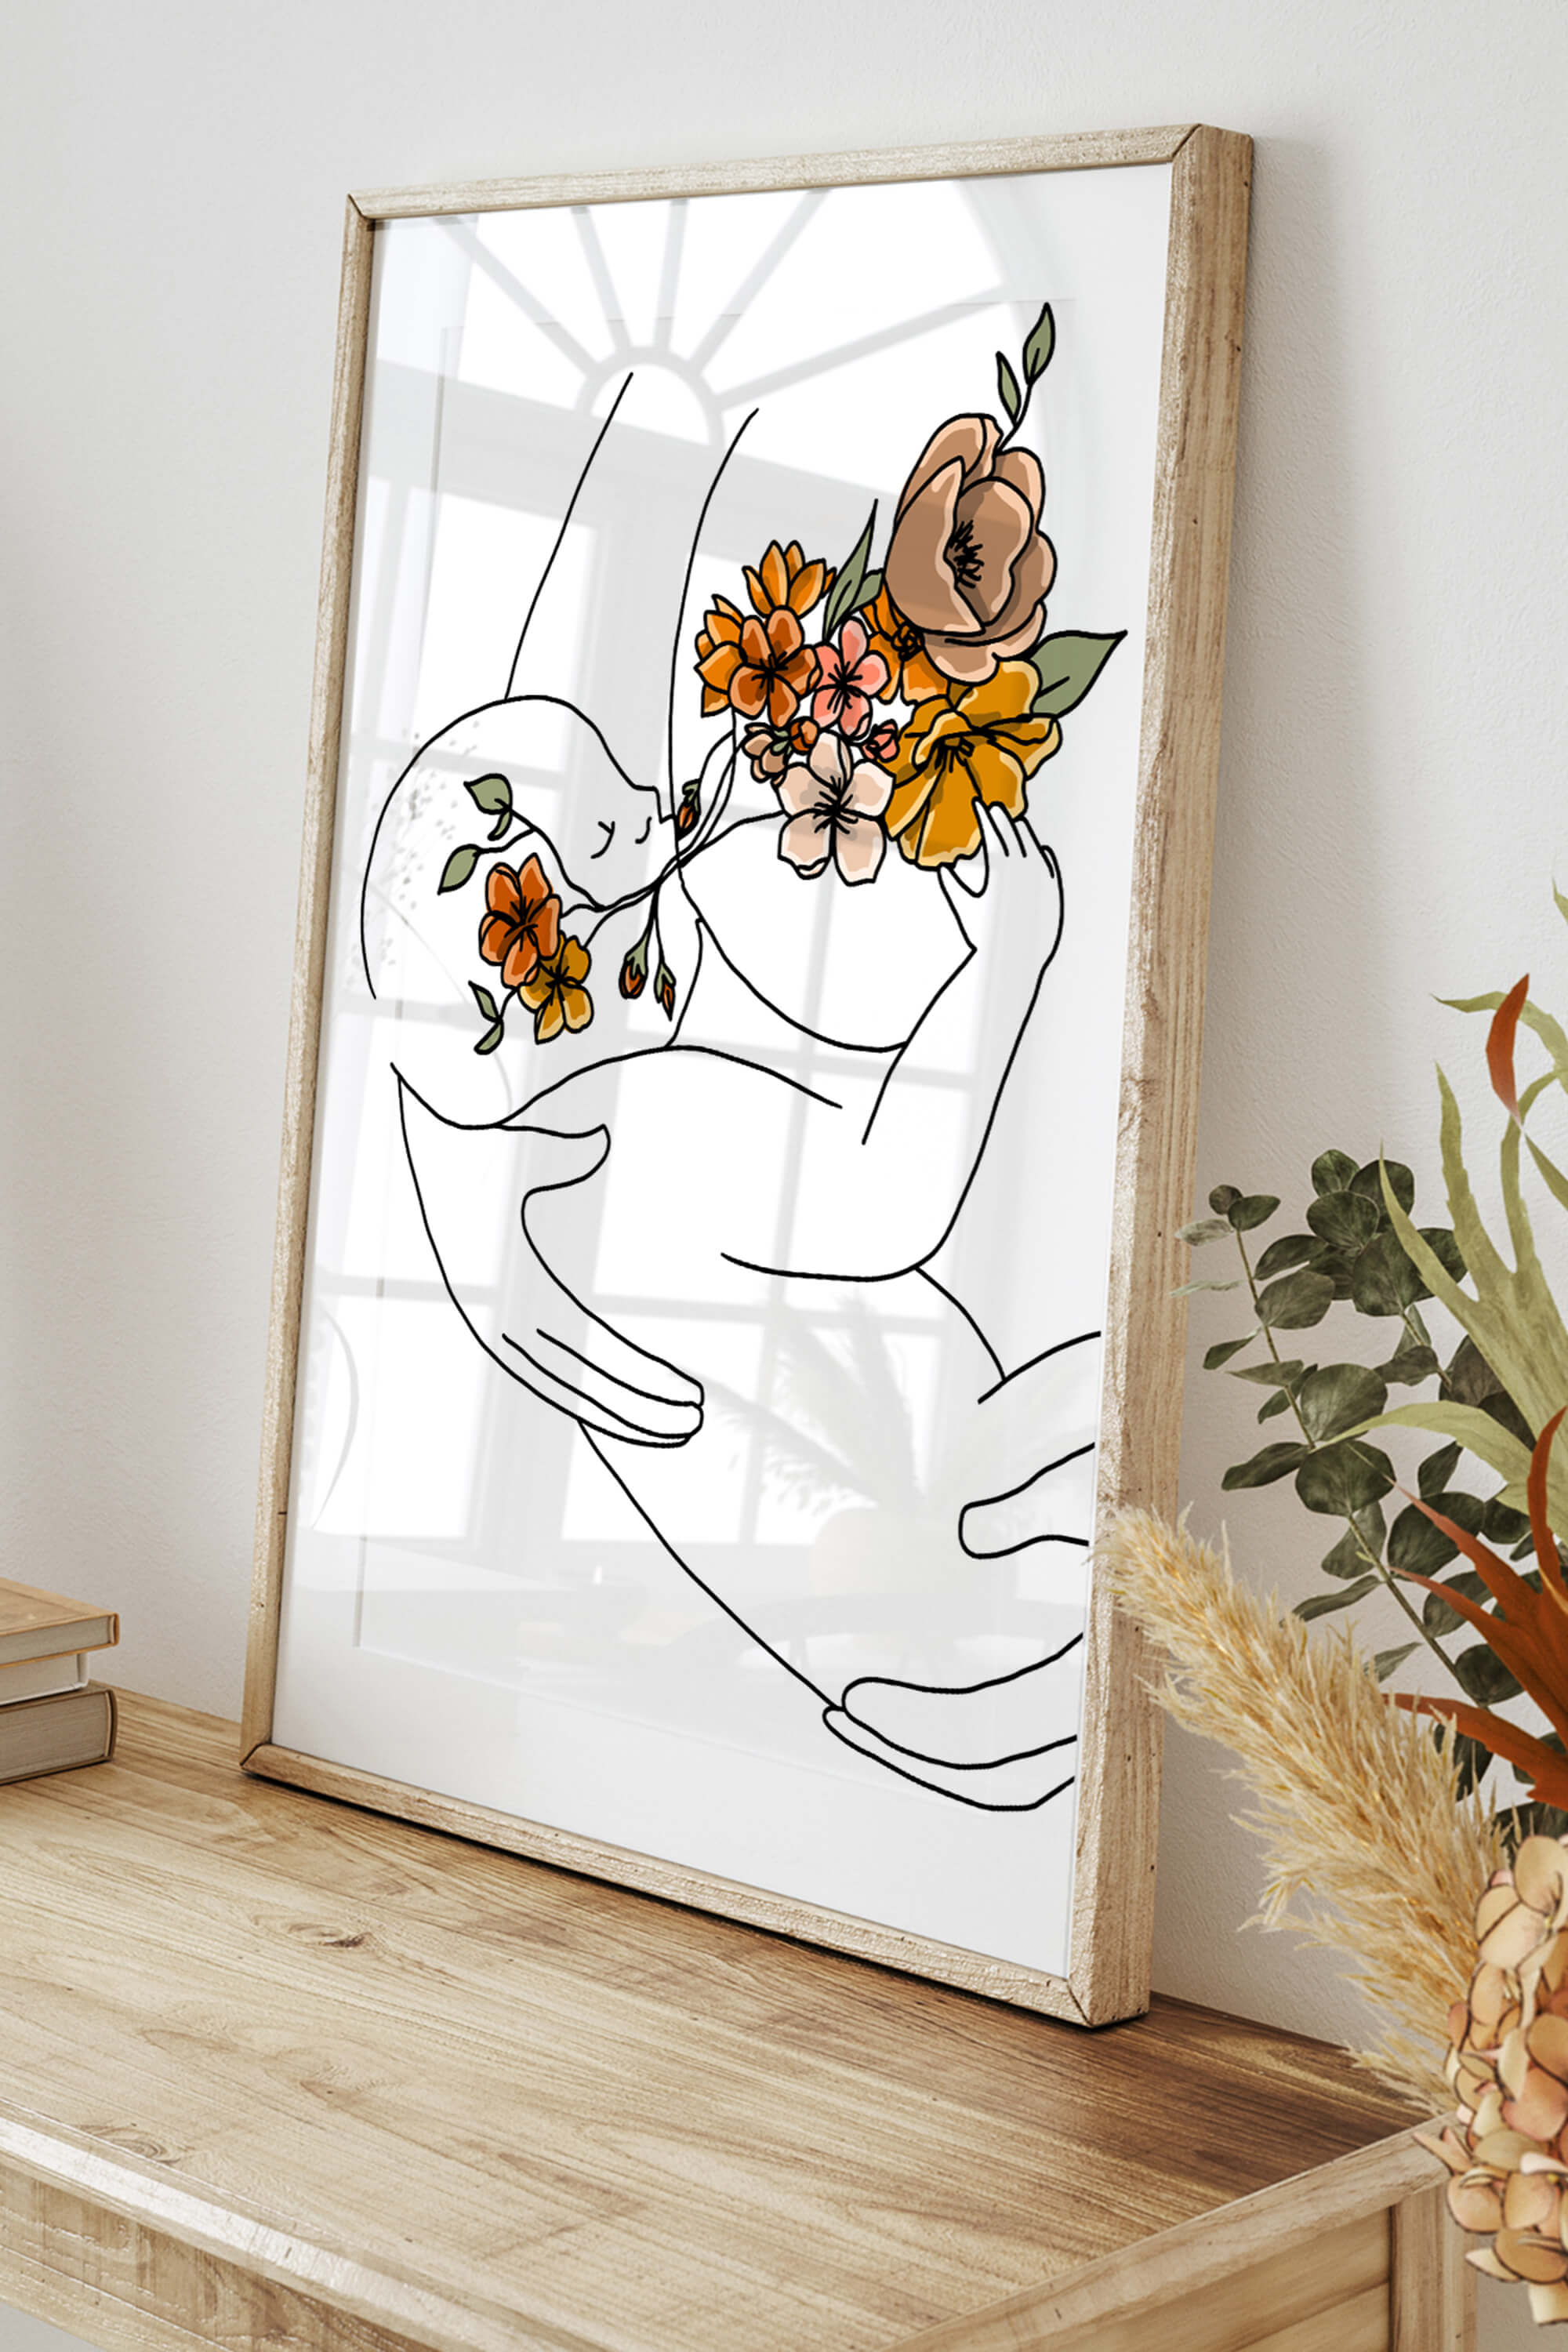 Breastfeeding Floral Anatomy Illustration, a delicate blend of nature and motherhood, great for doula office decor.